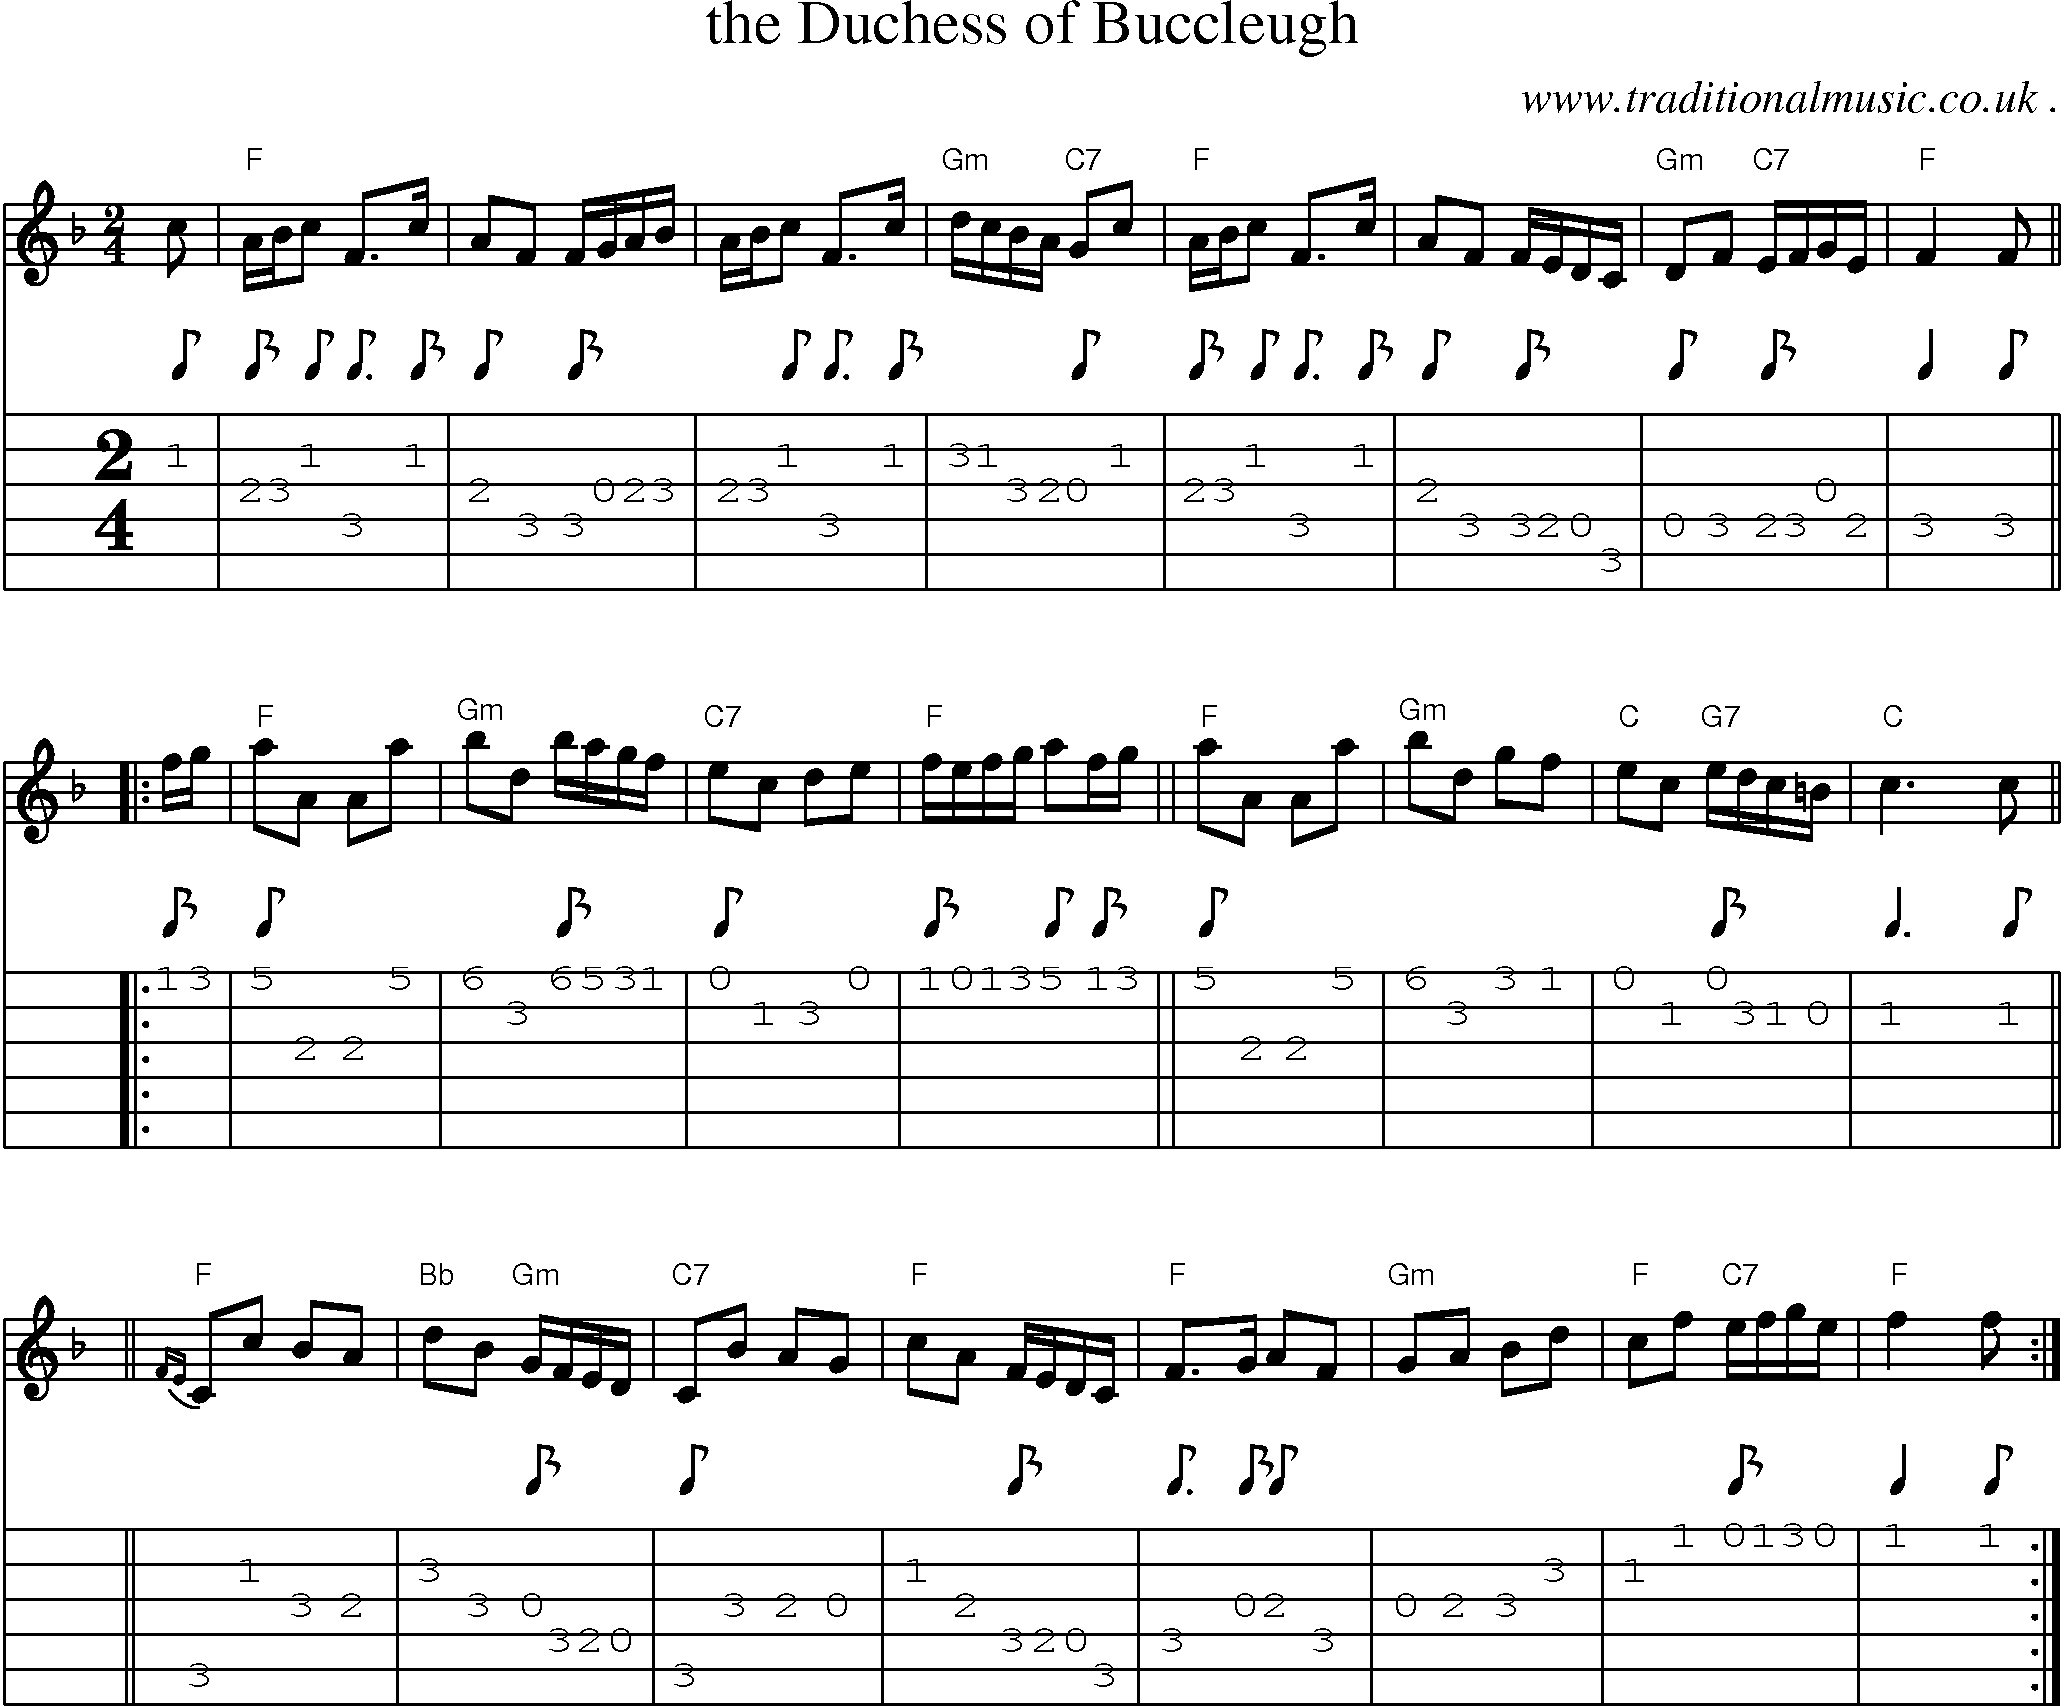 Sheet-music  score, Chords and Guitar Tabs for The Duchess Of Buccleugh